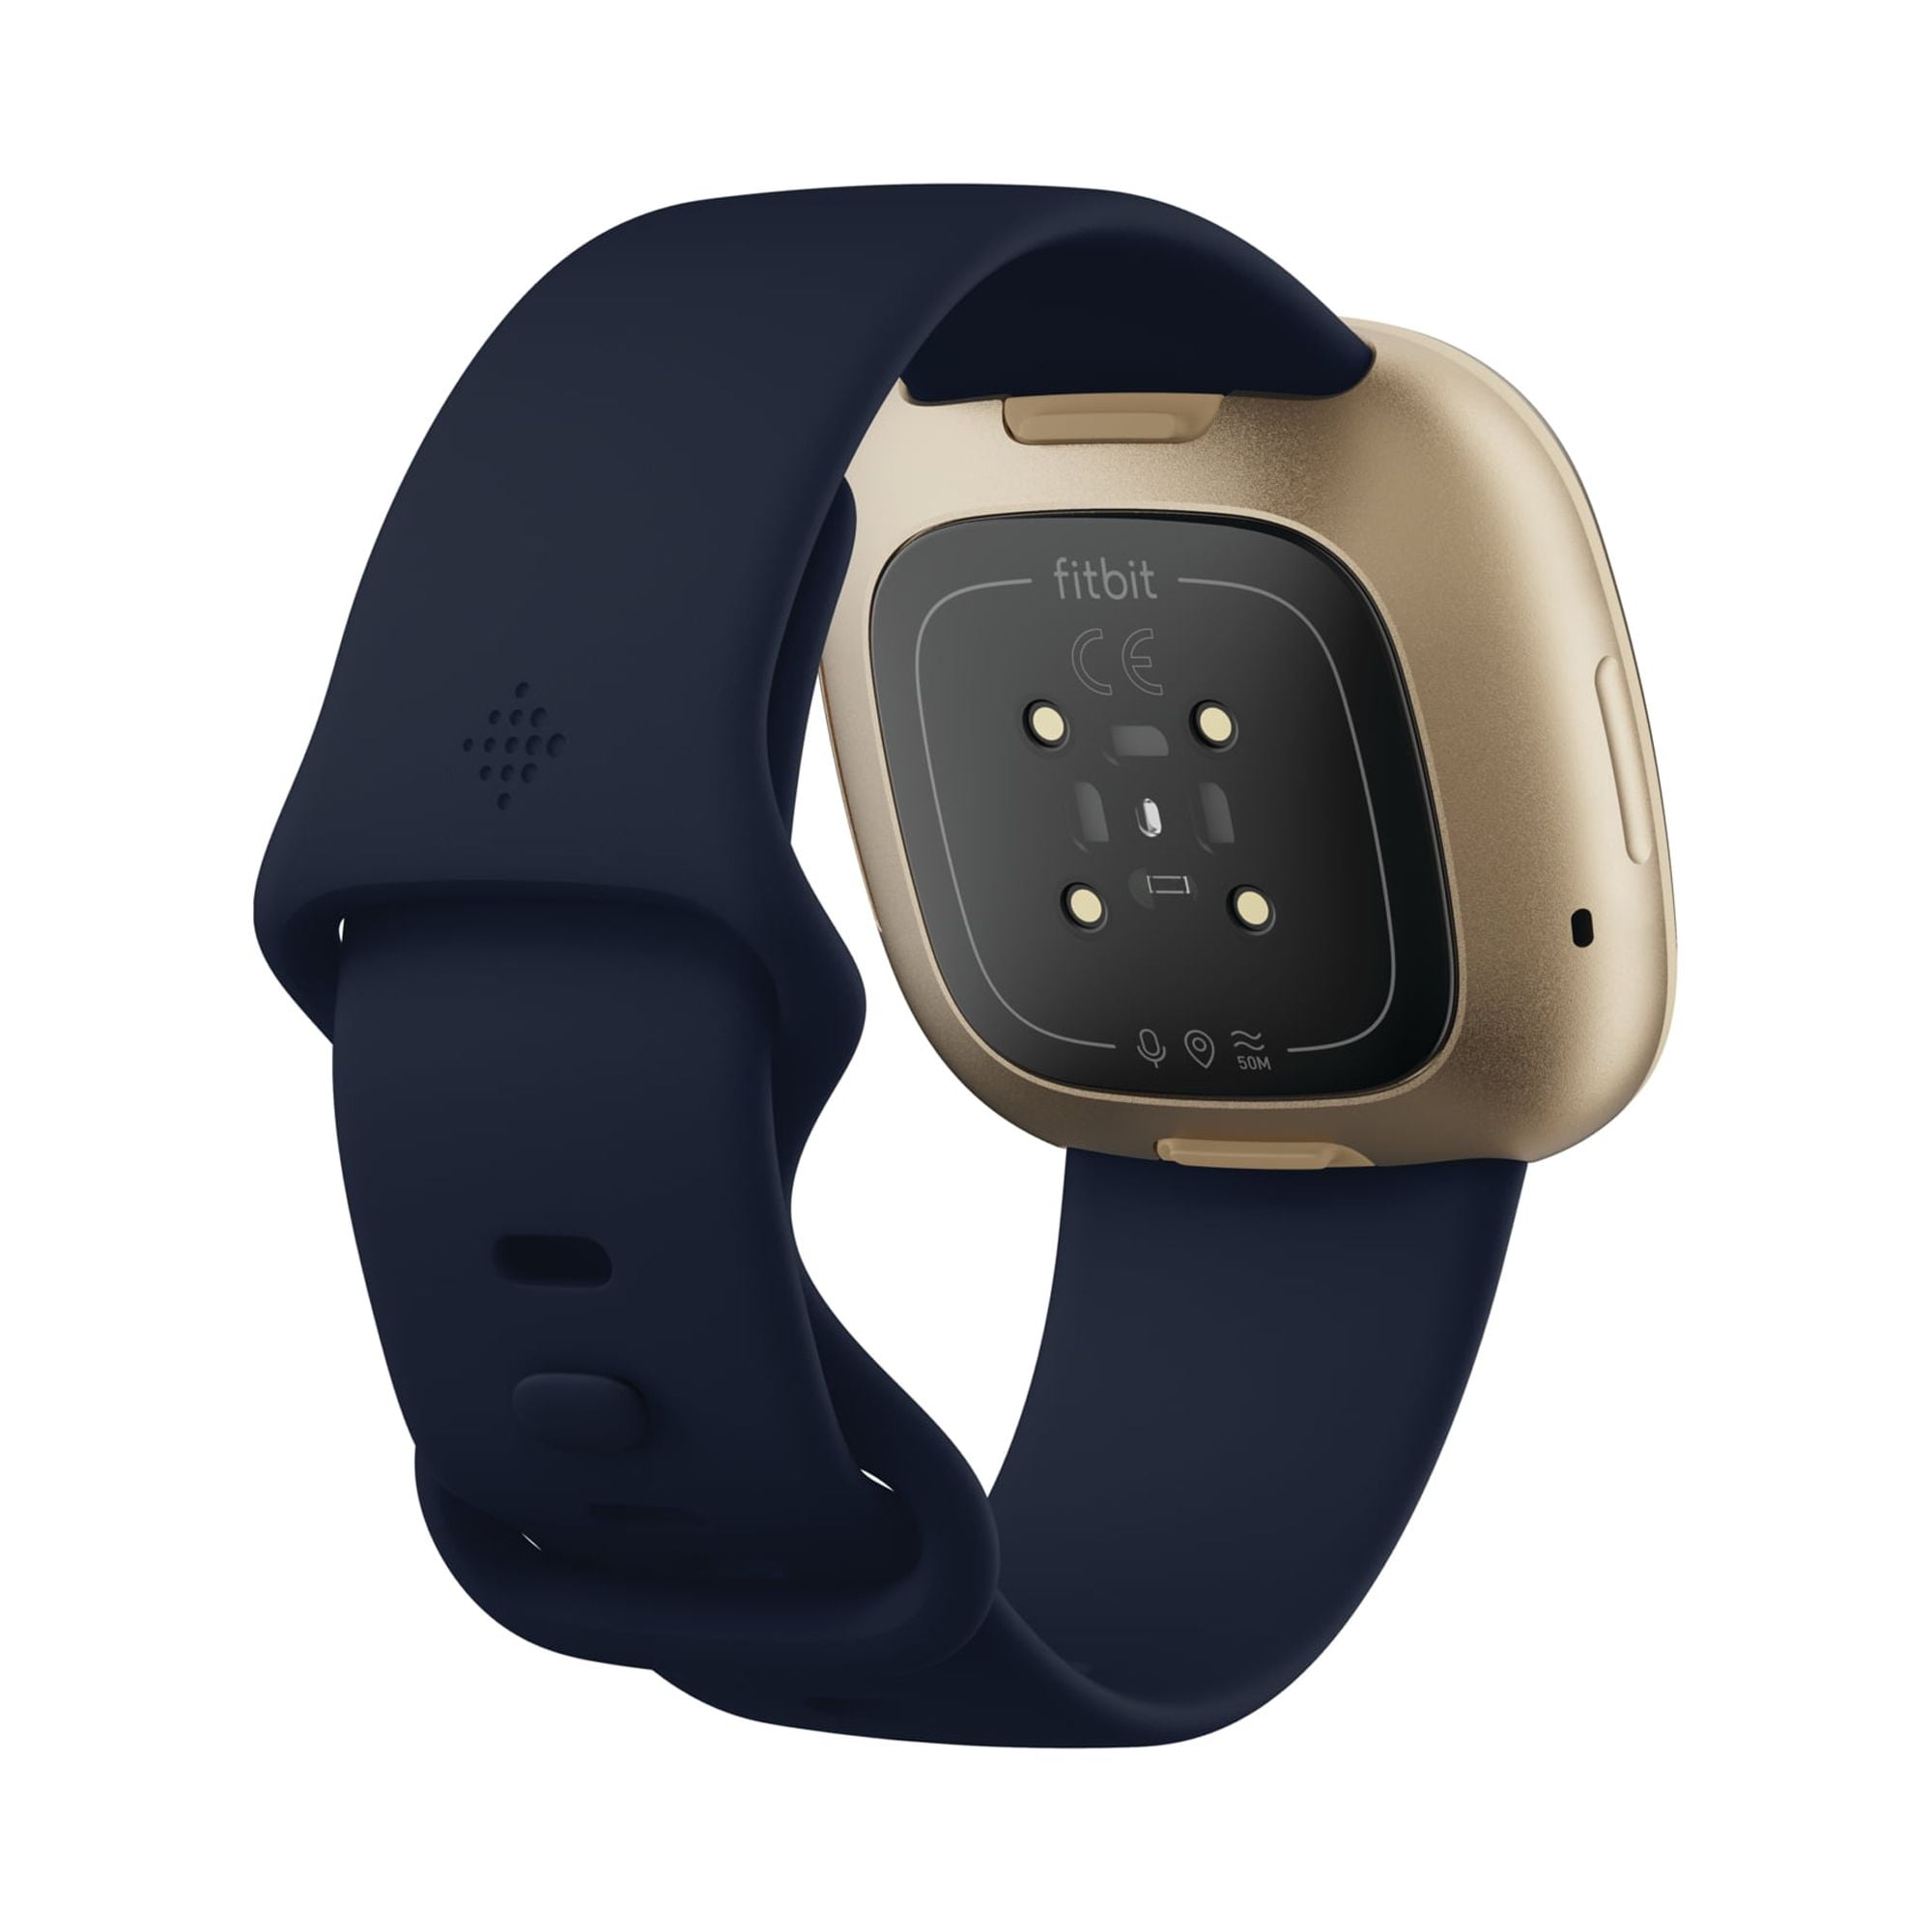 Fitbit Versa 3 Health & Fitness Smartwatch - Pink Clay/Soft Gold 